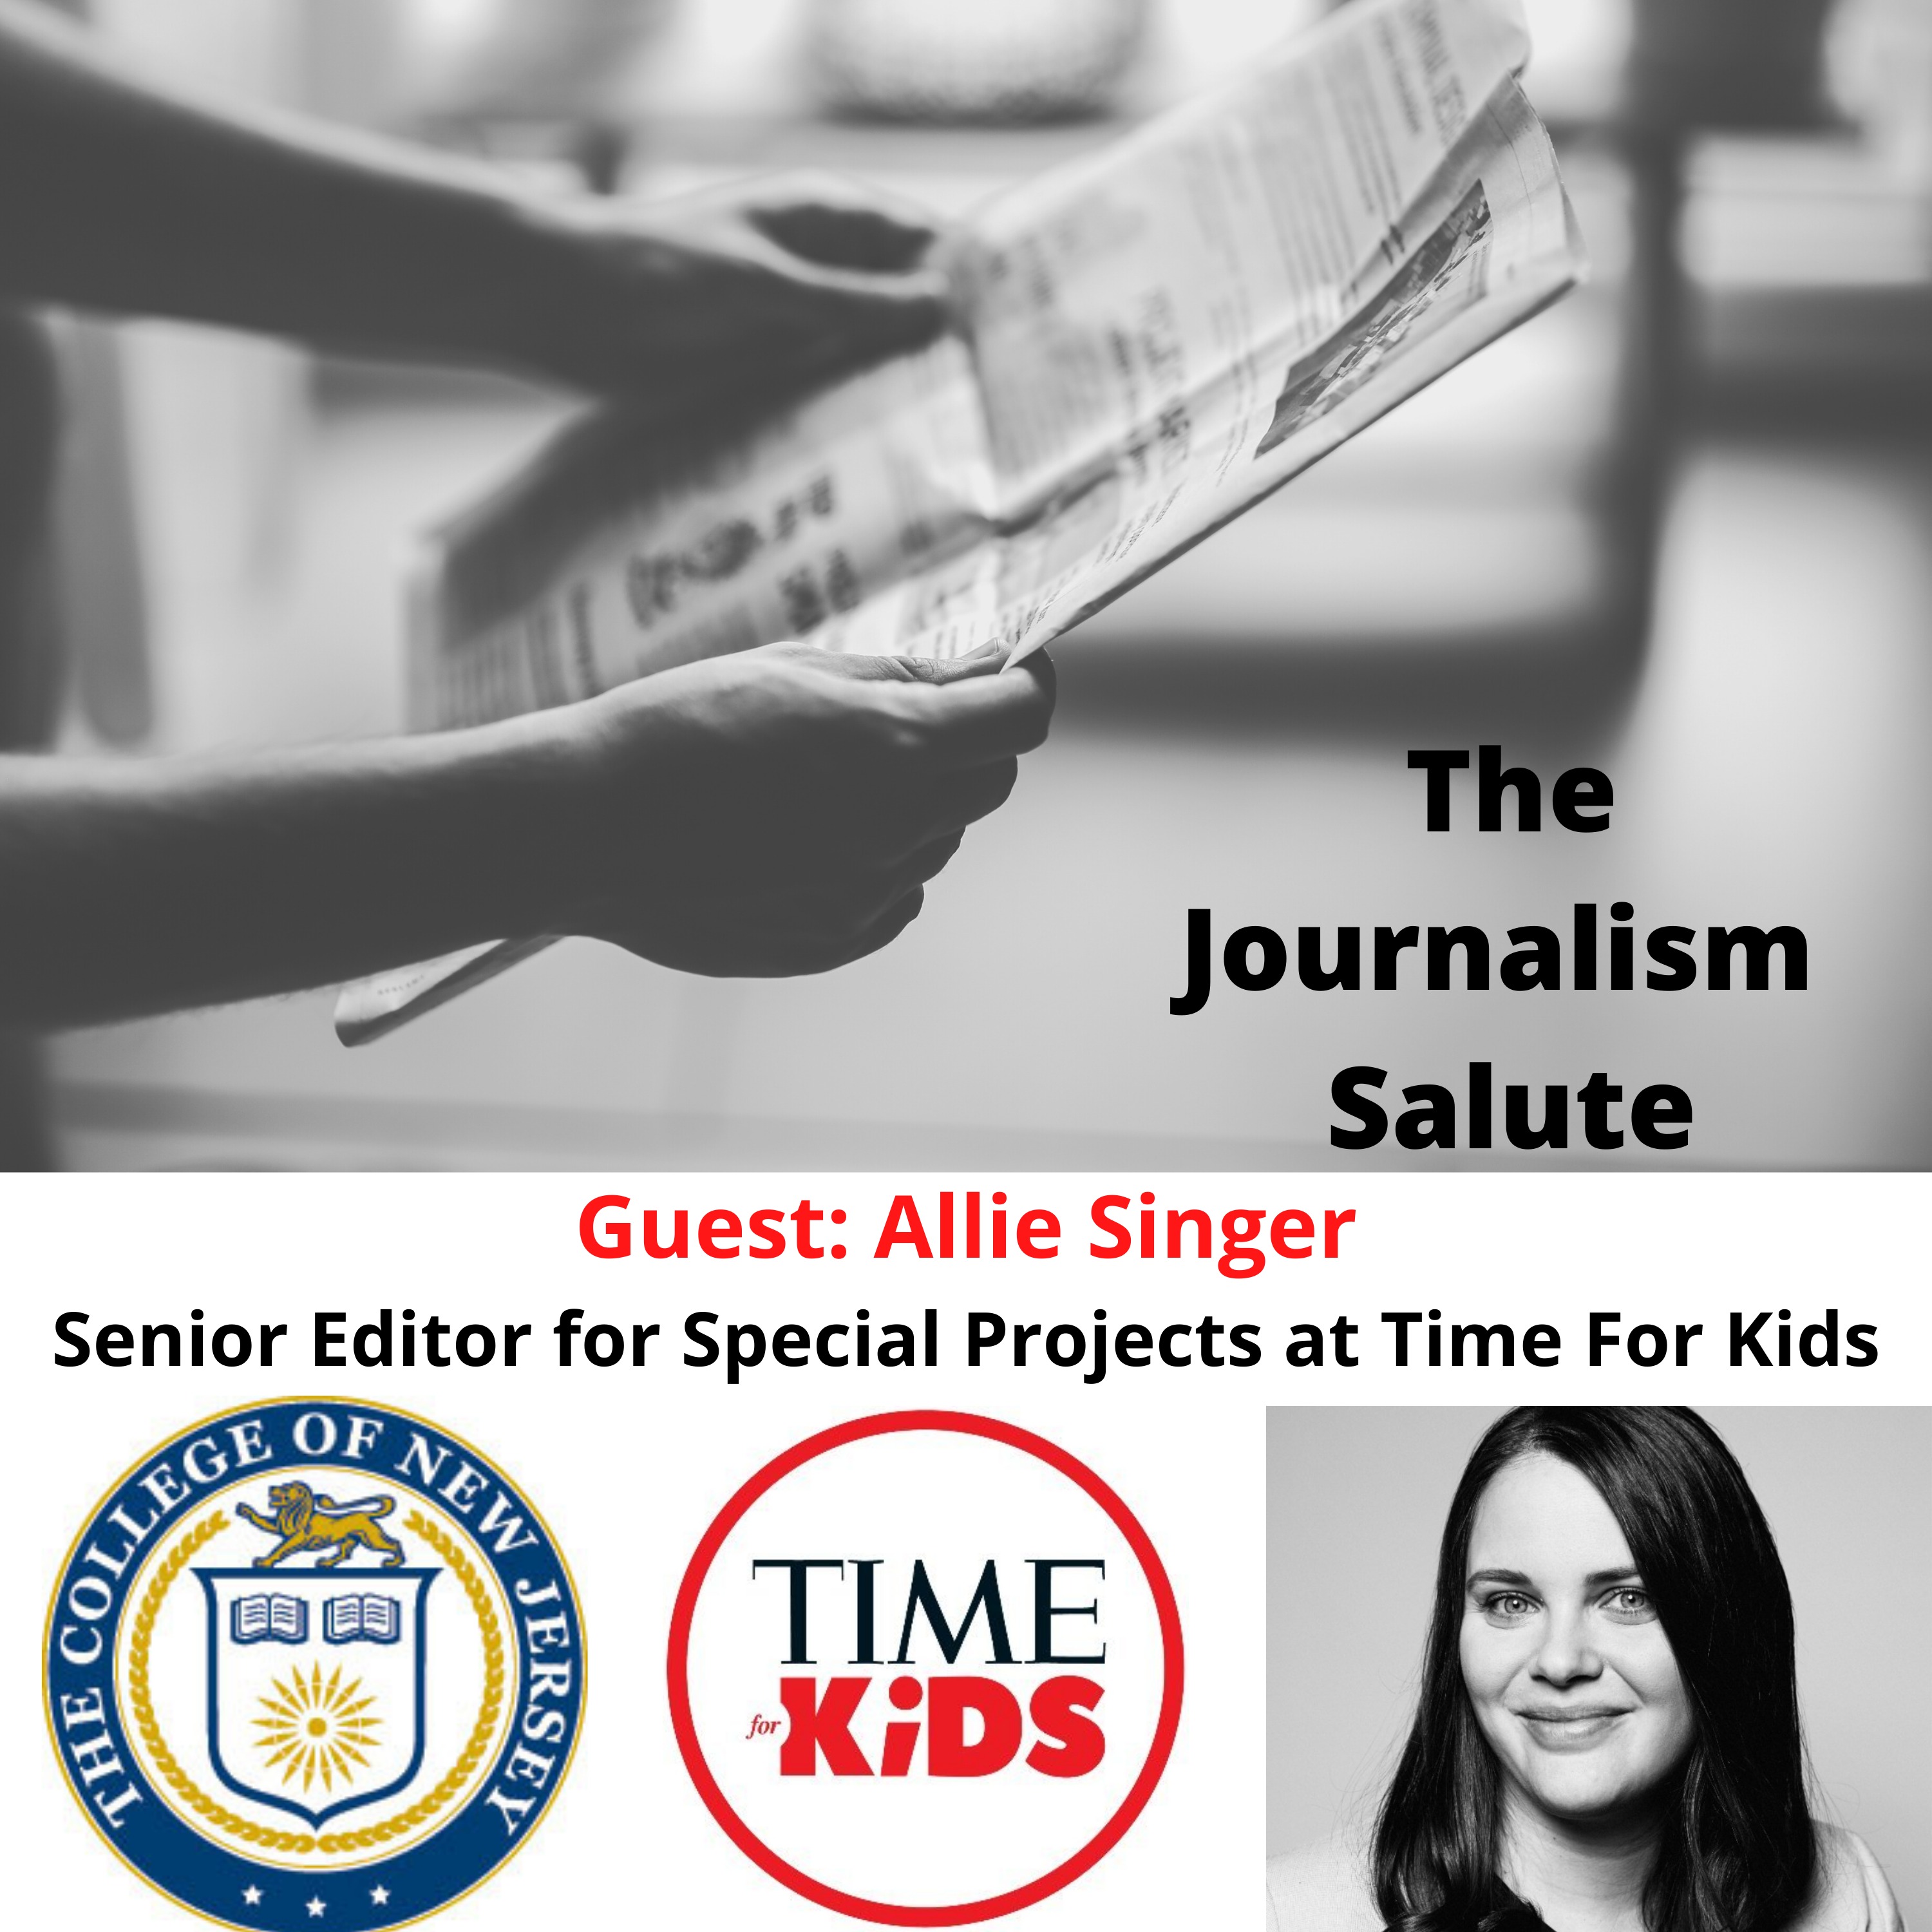 Allie Singer, Senior Editor for Special Projects at Time For Kids